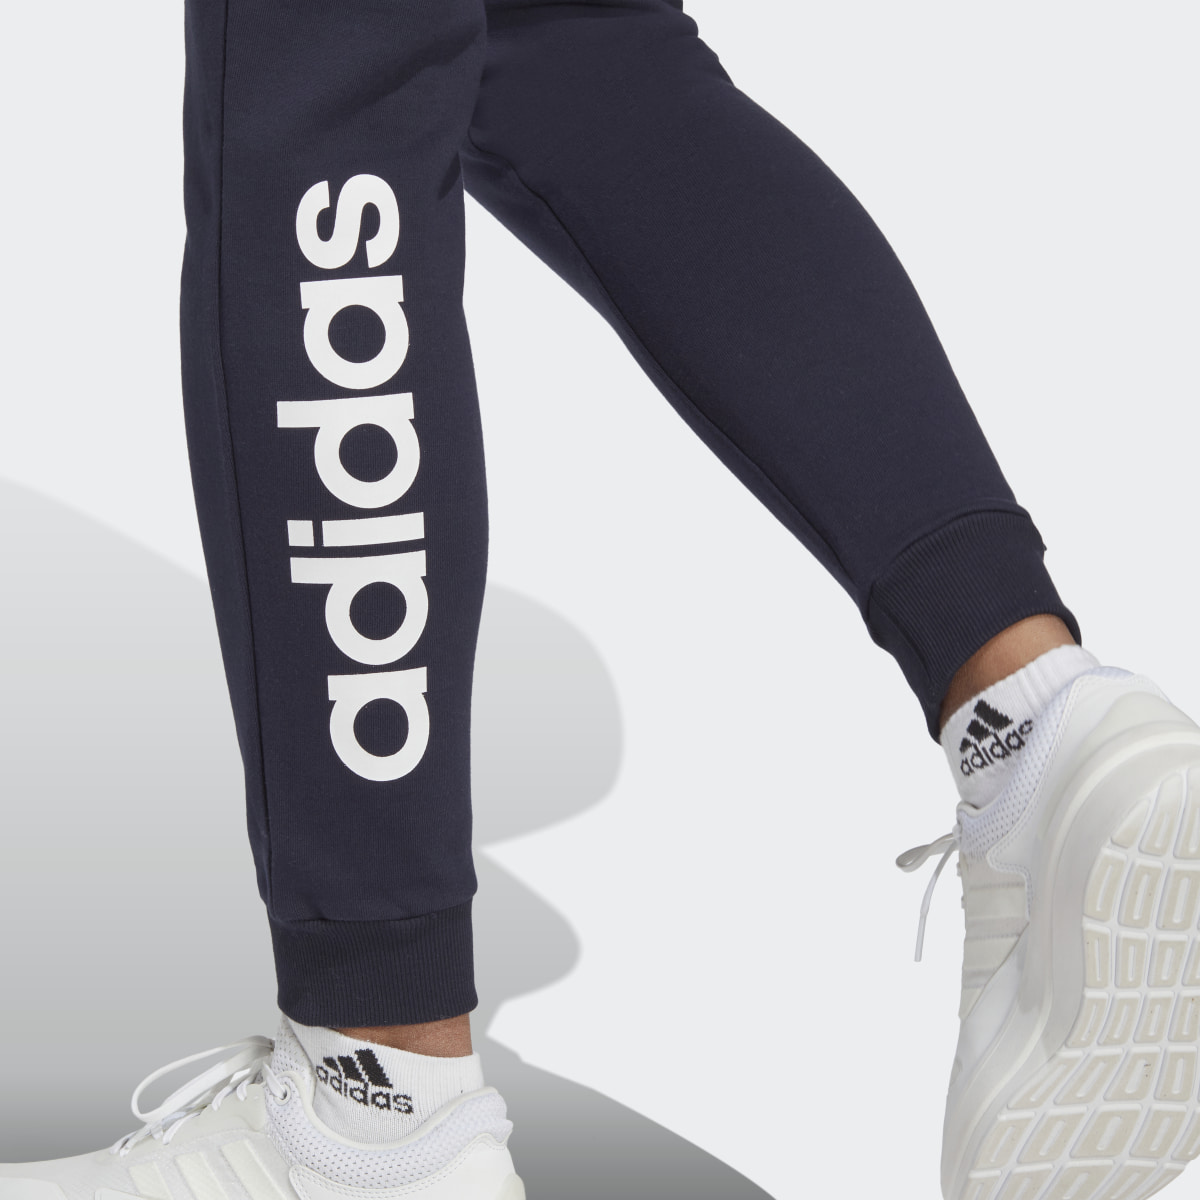 Adidas Essentials Linear French Terry Cuffed Joggers. 6